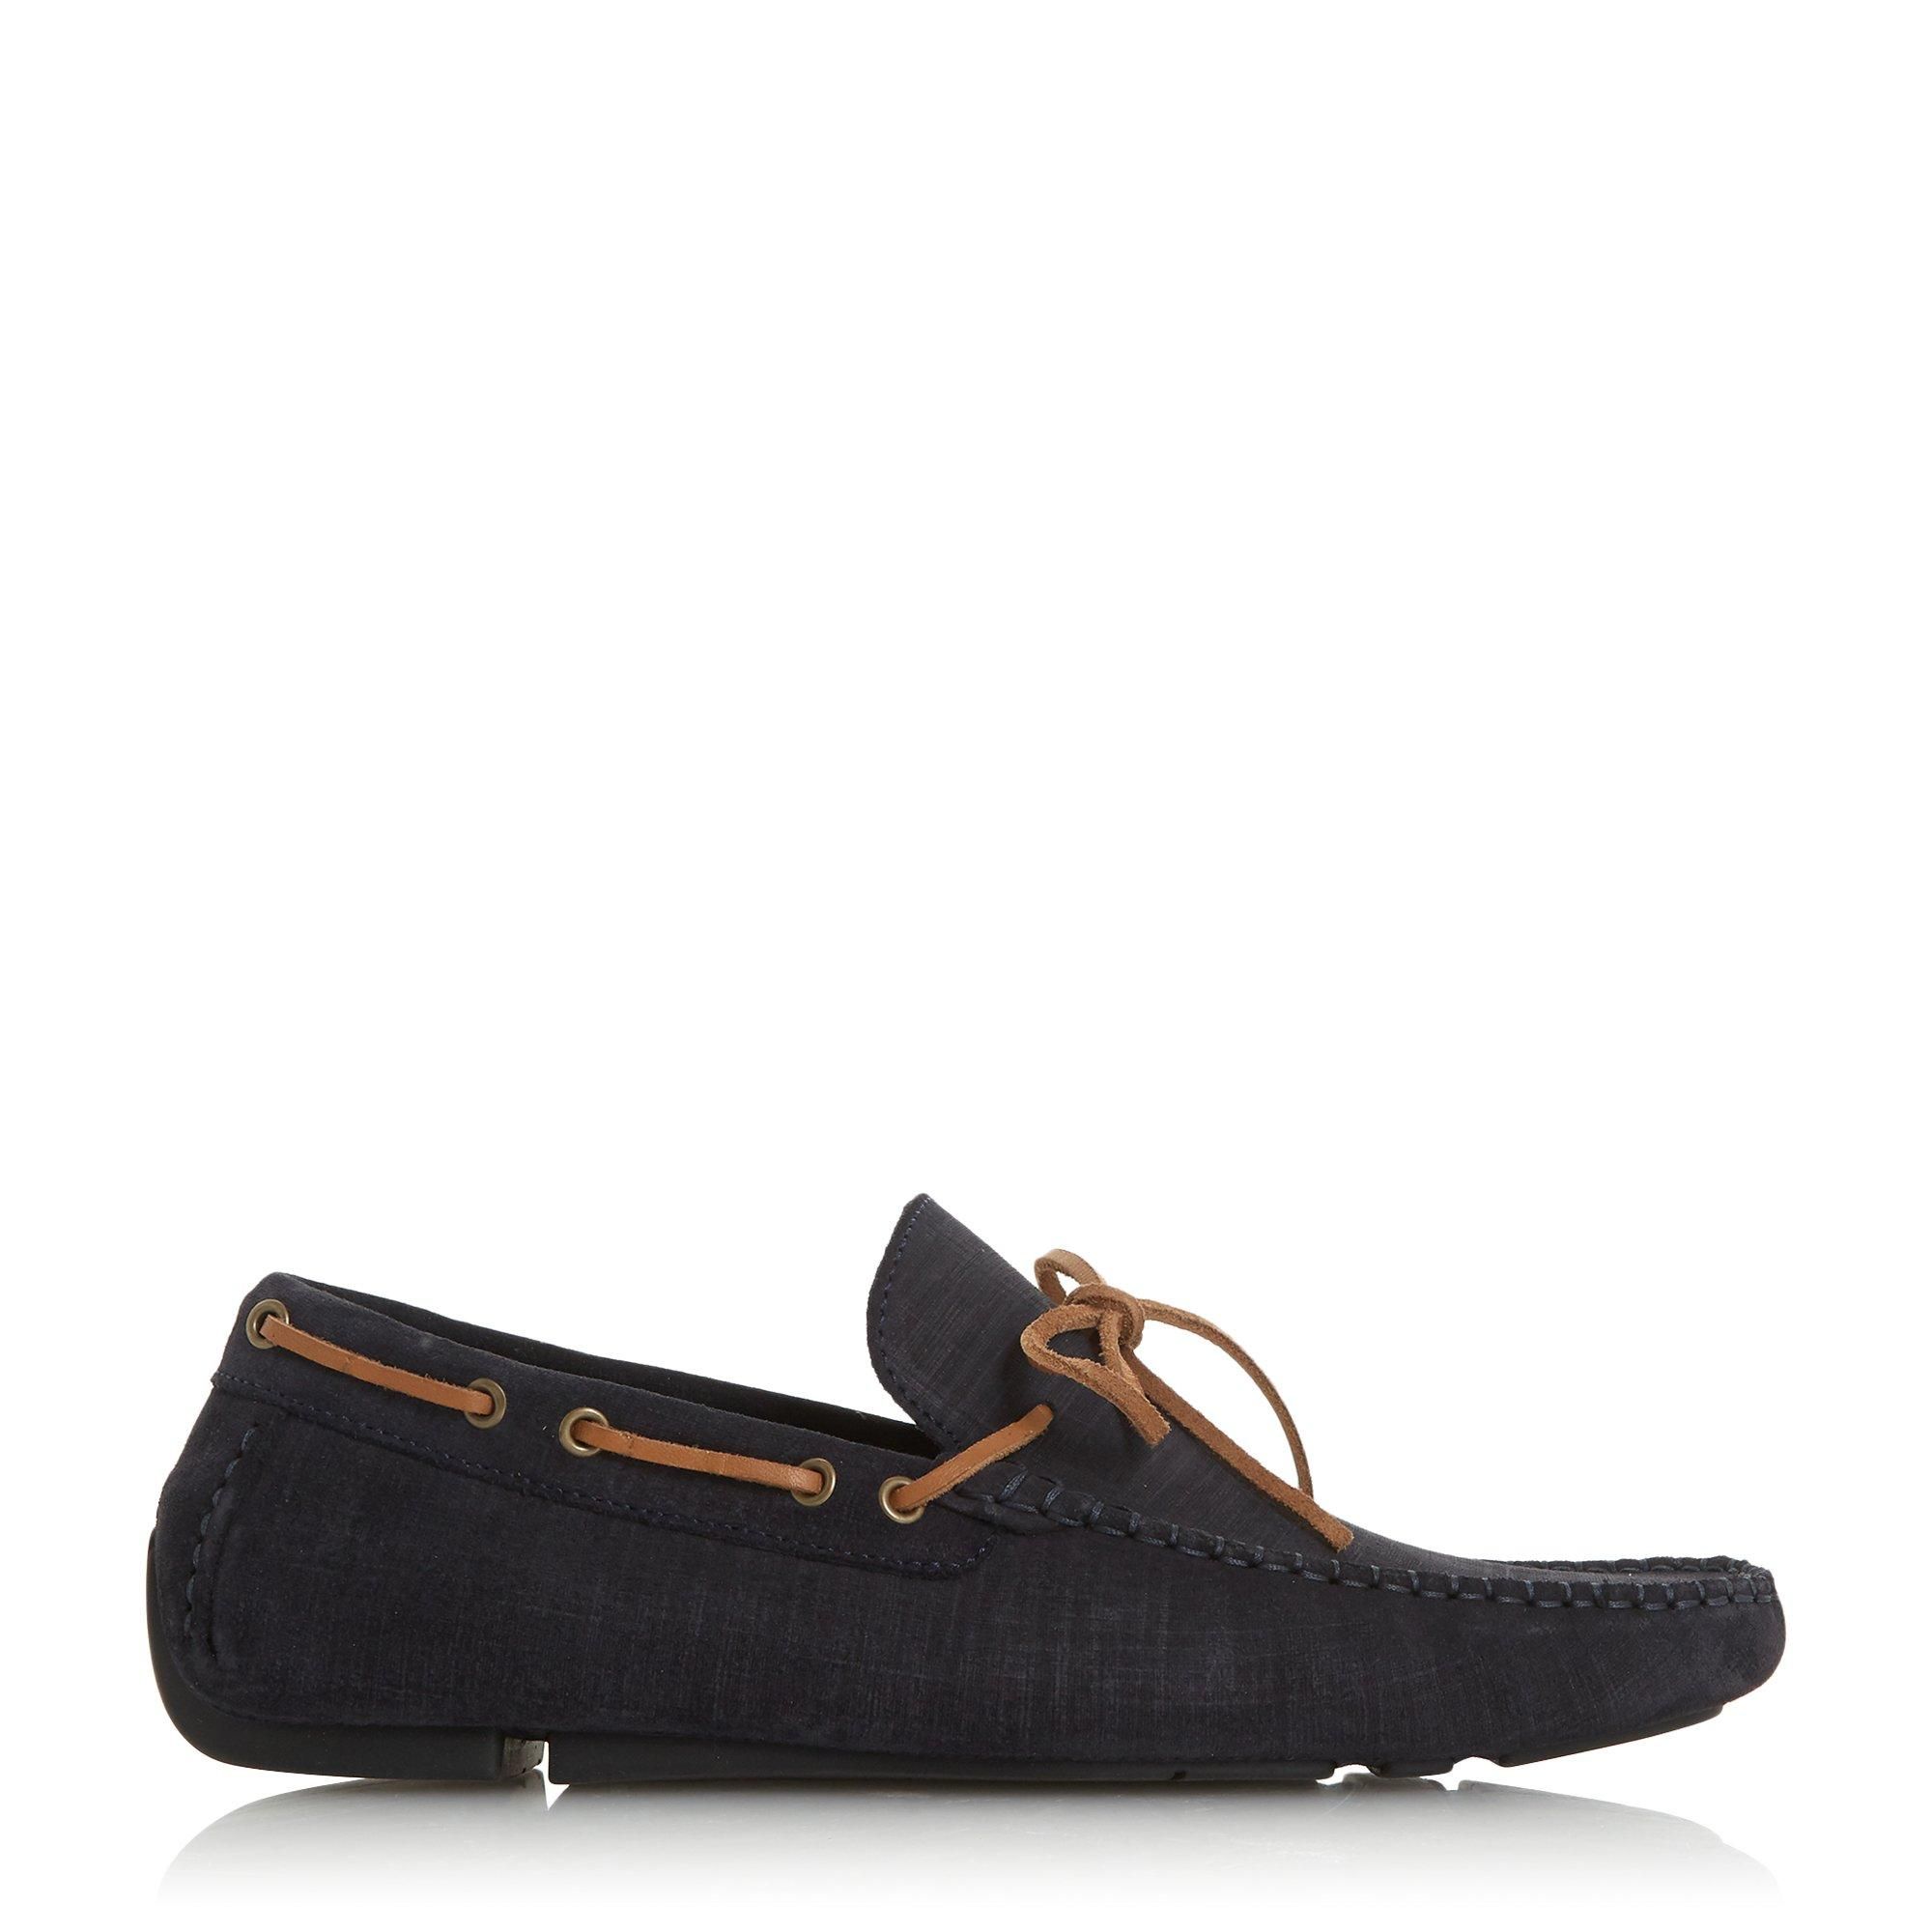 This handsome loafer is the perfect choice for updating your line-up. In a classic slip on moccasin design with a self tie lace upper. It's complete with a cushioned footbed for exceptional comfort.